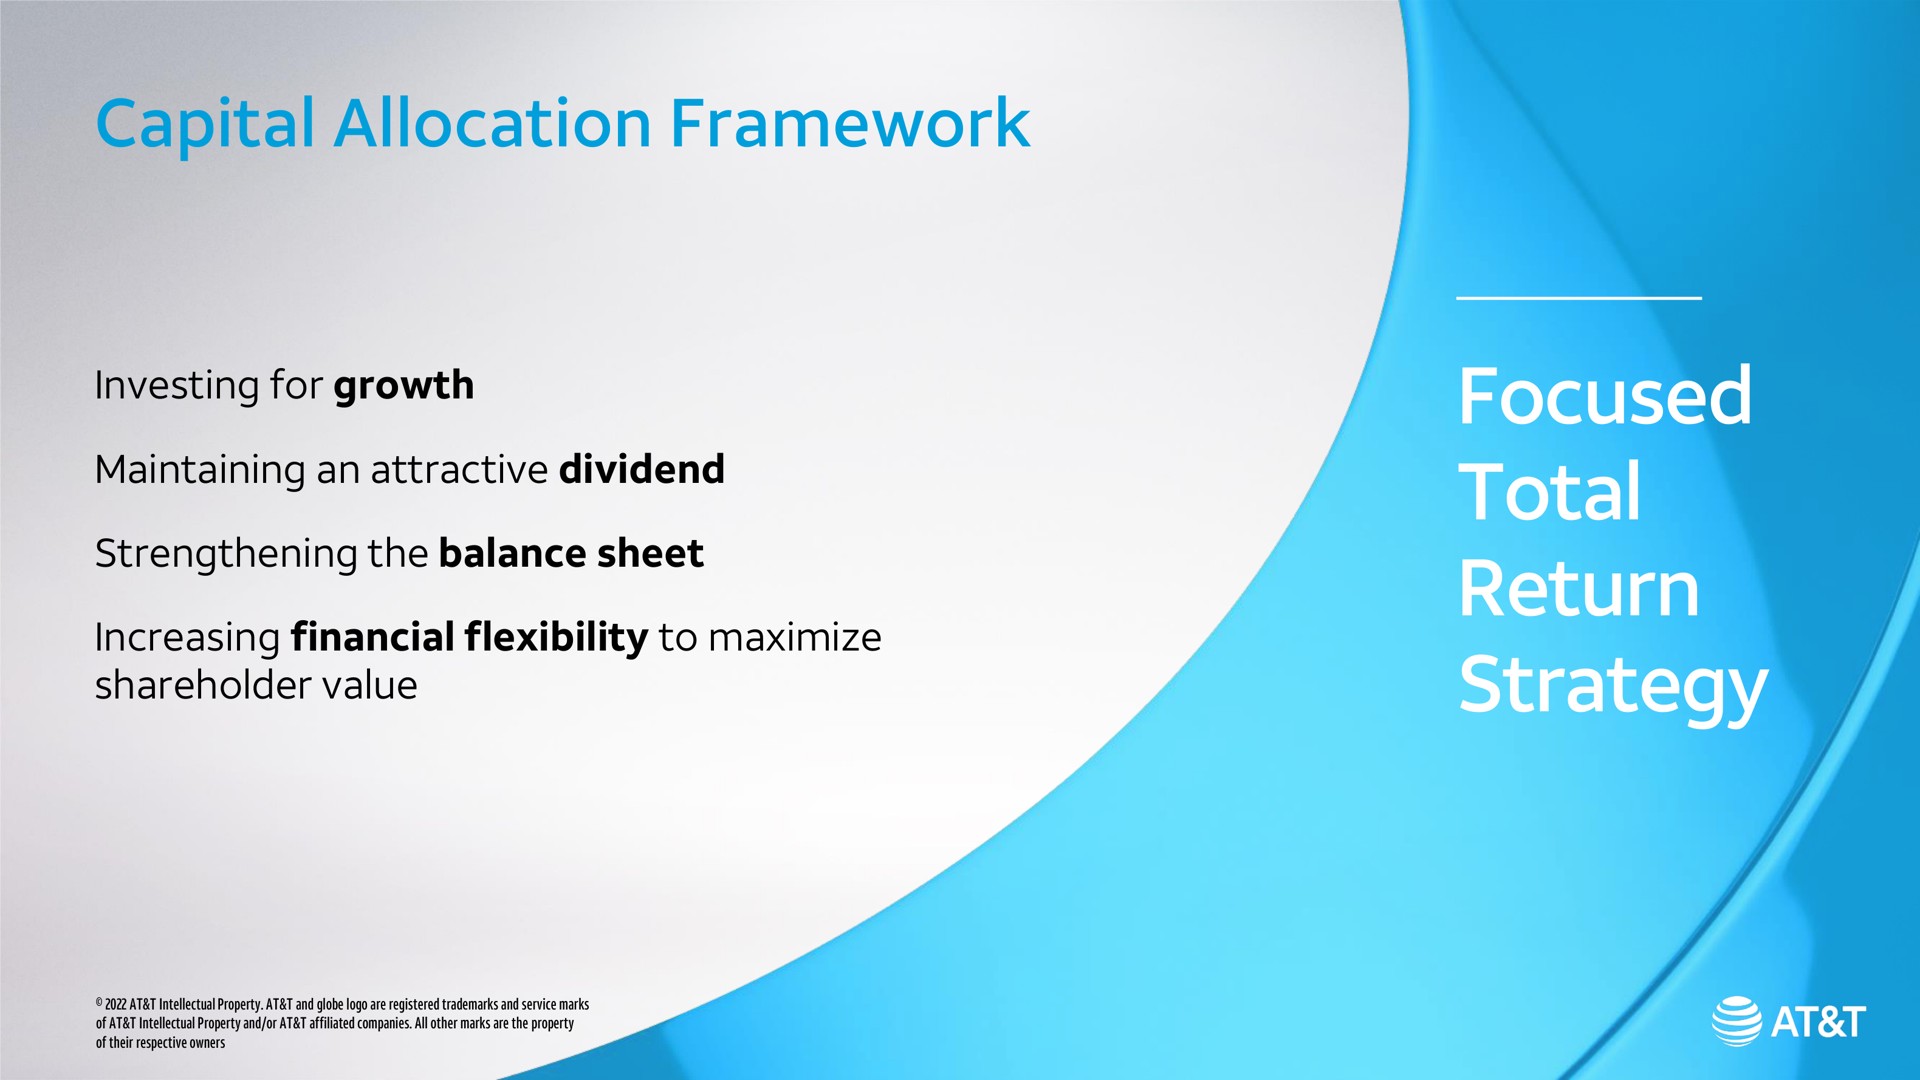 capital allocation framework focused total return strategy | AT&T